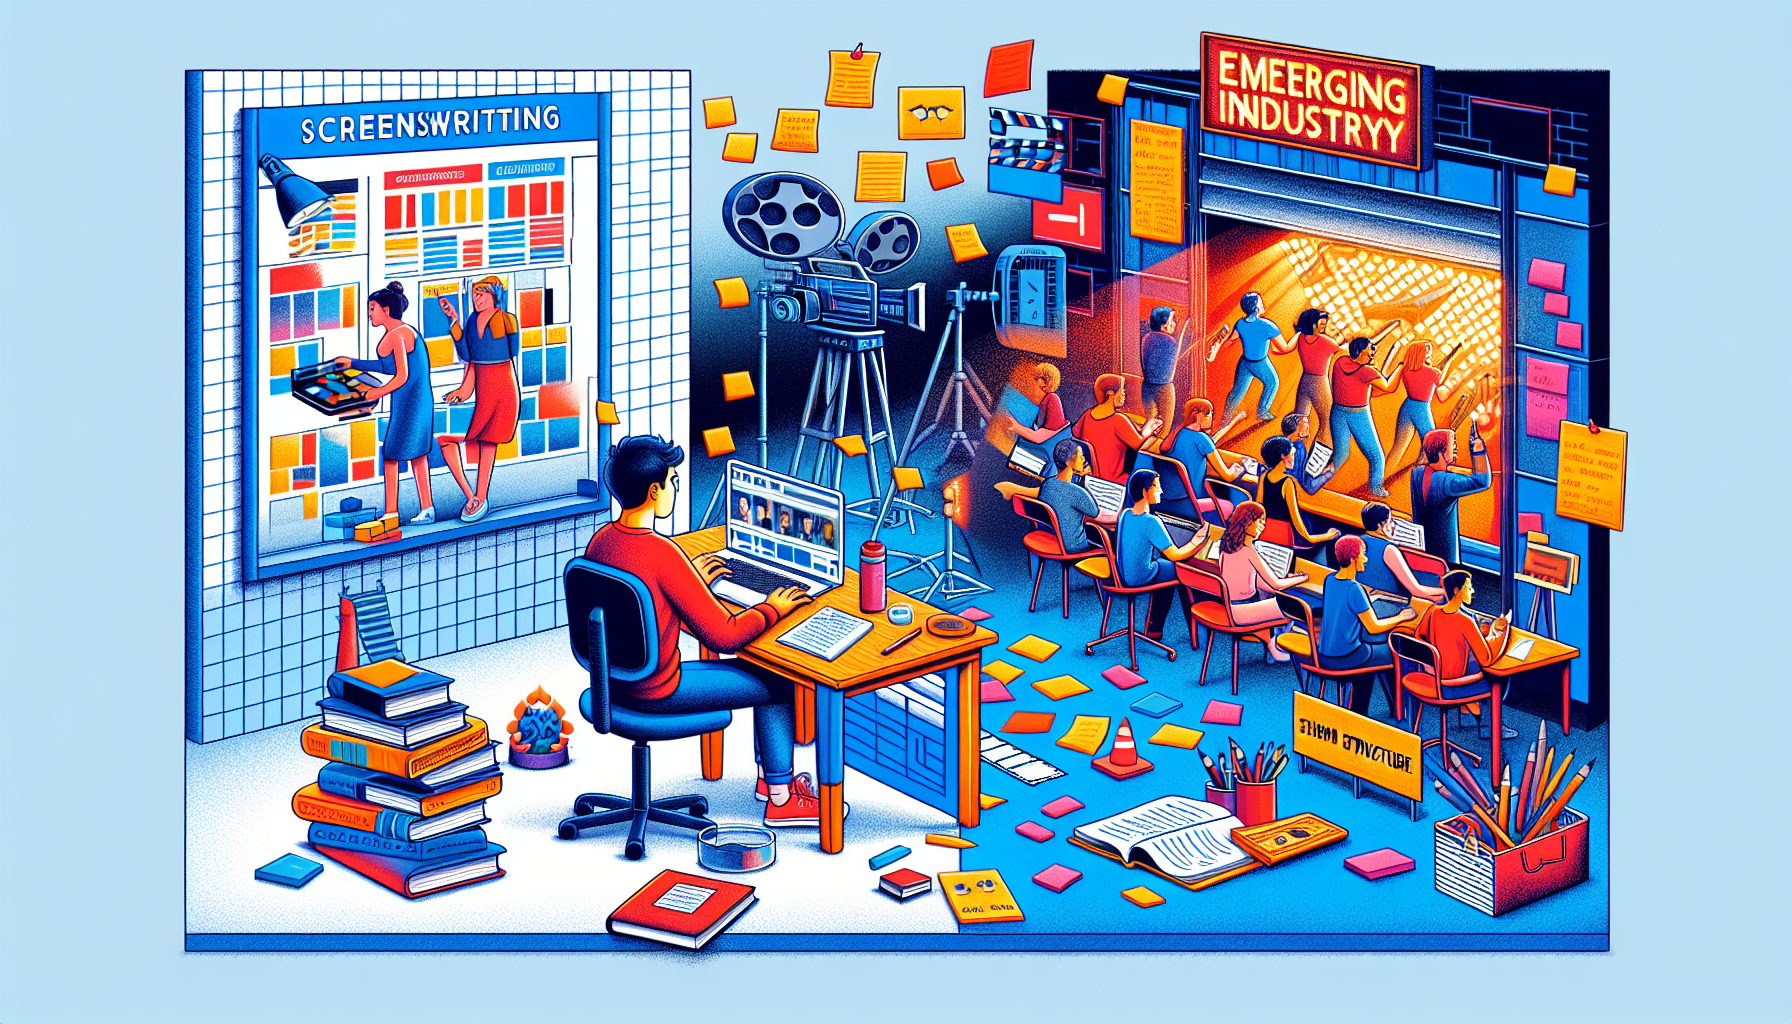 Create an image depicting the journey of mastering screenwriting: a creative writer at their desk surrounded by books on three-act structure, with storyboards and sticky notes covering the walls, evolving into a bustling film set where actors perform under bright lights and cameras. Include elements of industry trends such as a digital screen highlighting streaming platforms and a film festival banner in the background.